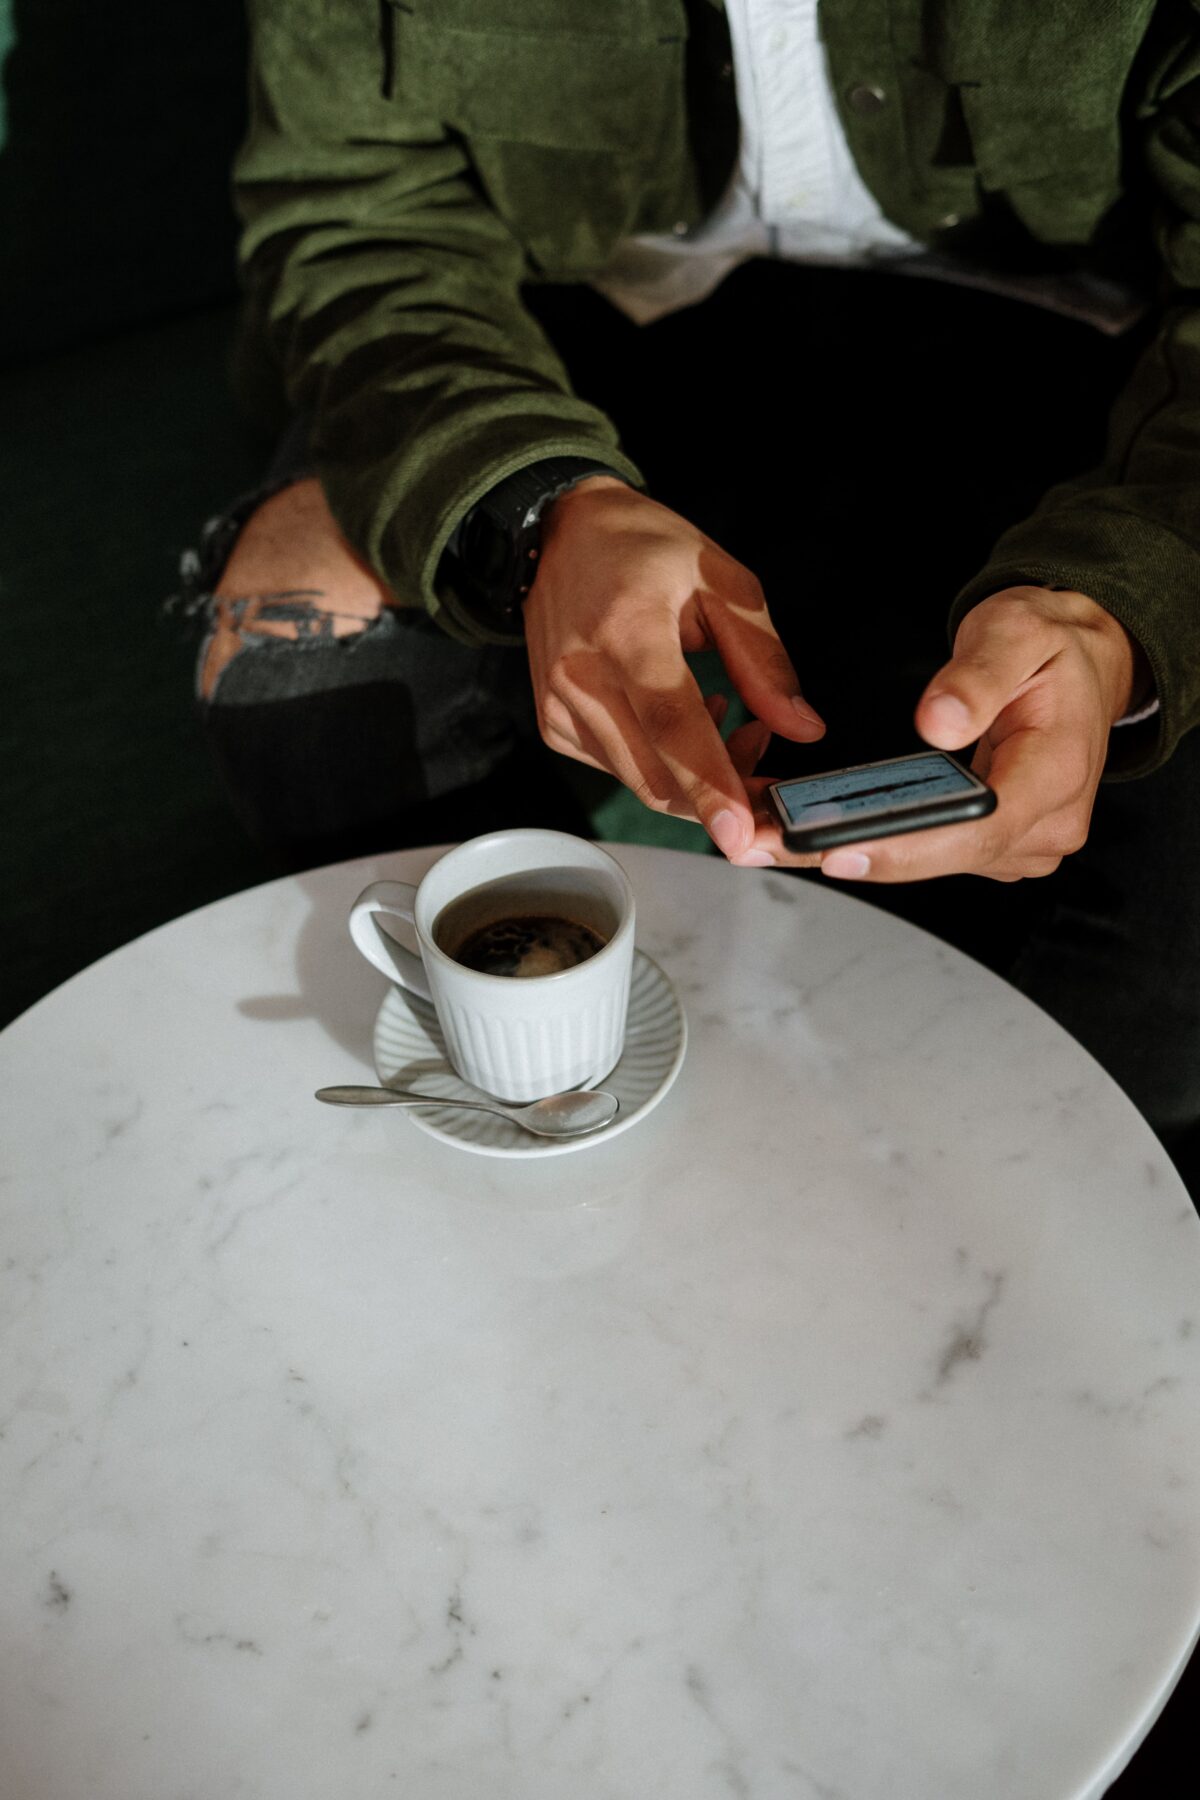 Man holding phone at table with cup of coffee and spoon